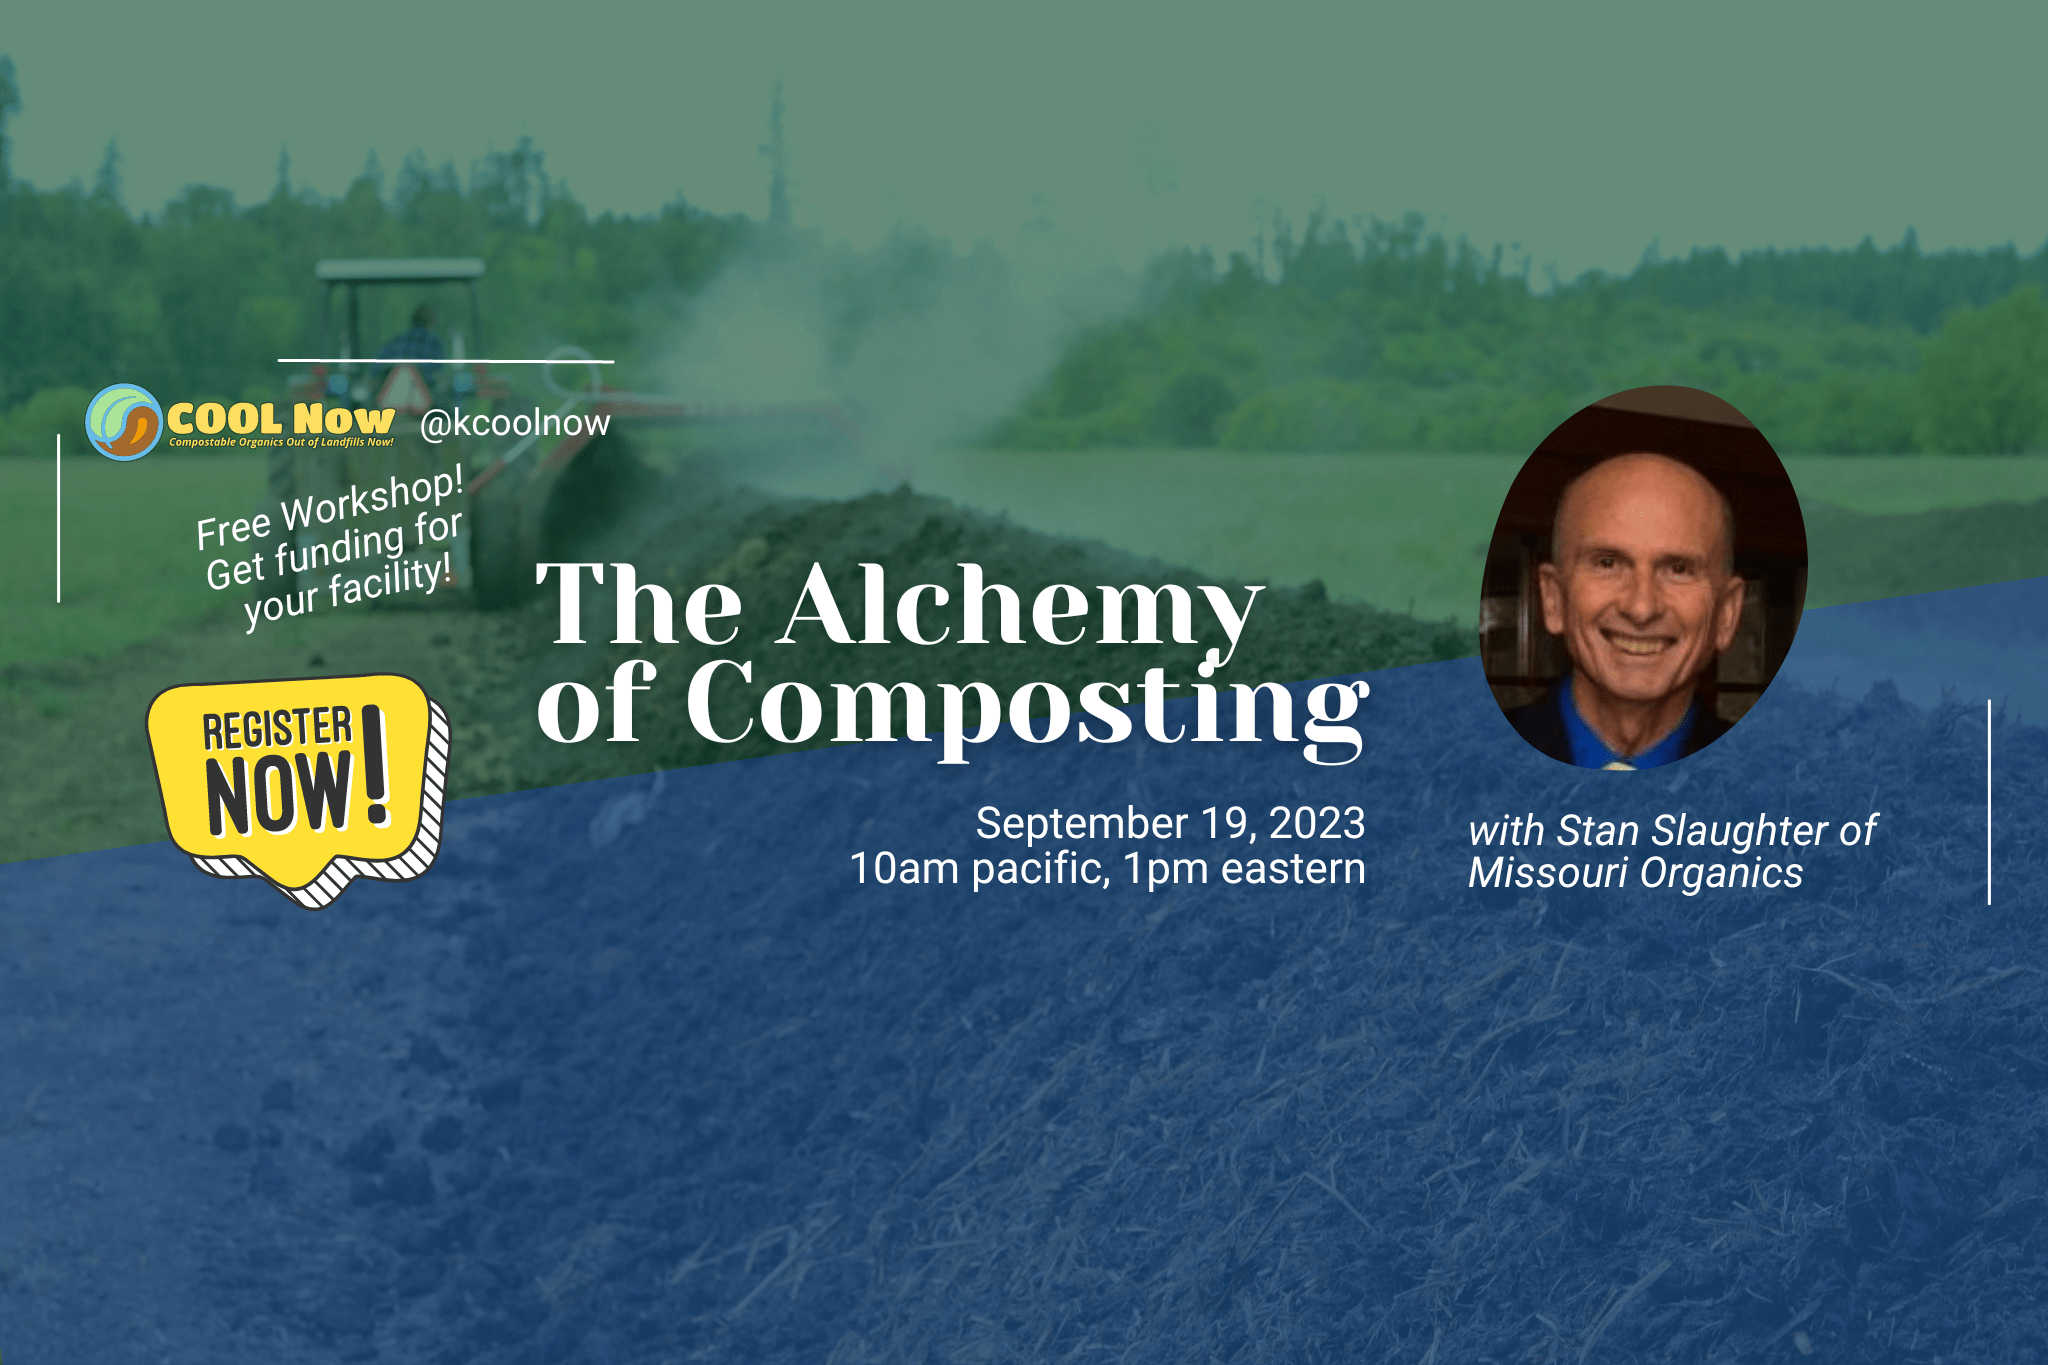 The Alchemy of Composting - Workshop with Stan Slaughter